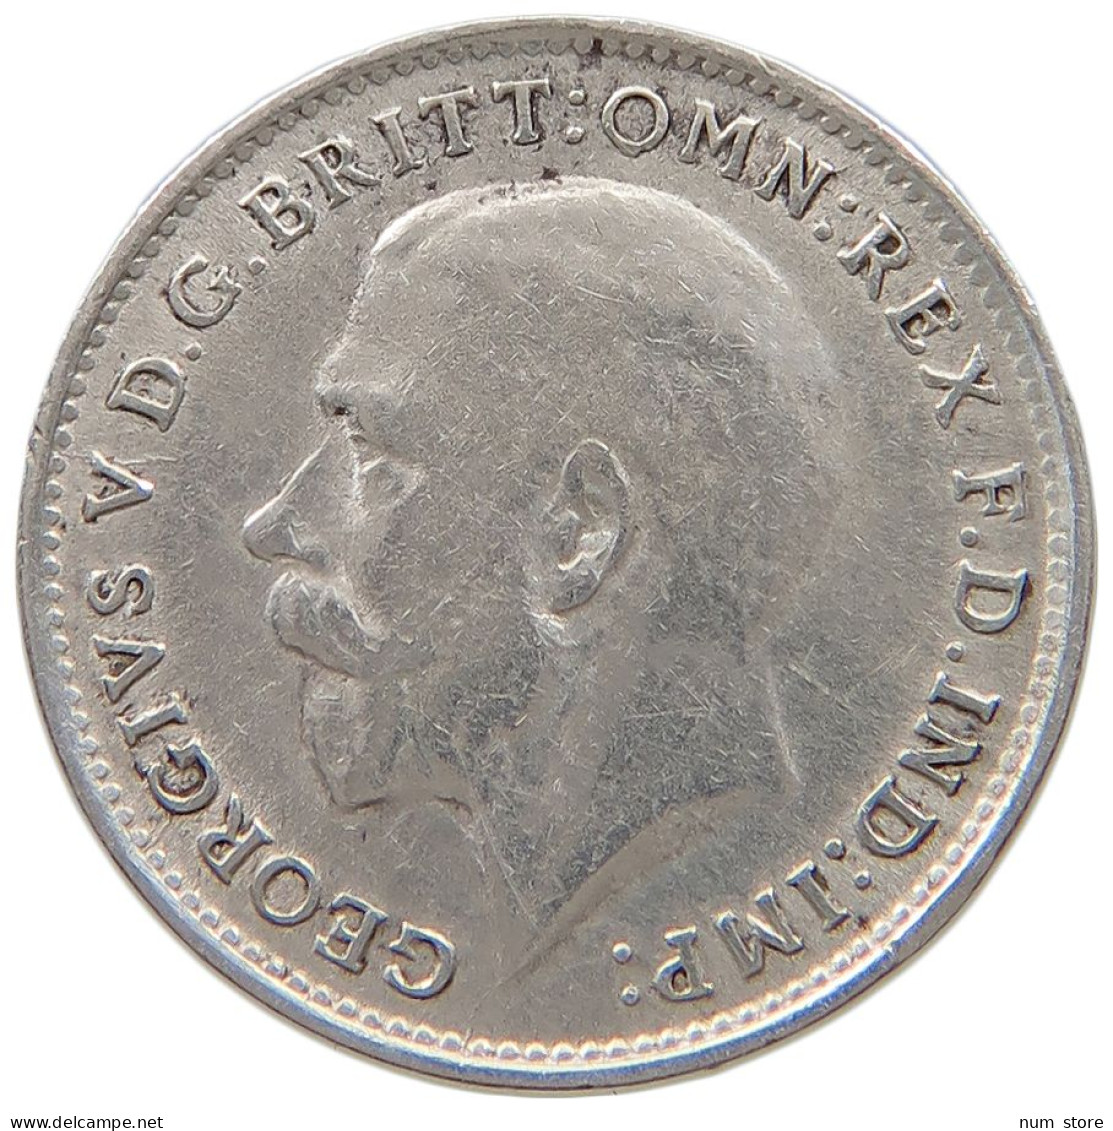 GREAT BRITAIN THREEPENCE 1916 George V. (1910-1936) #a052 0467 - F. 3 Pence